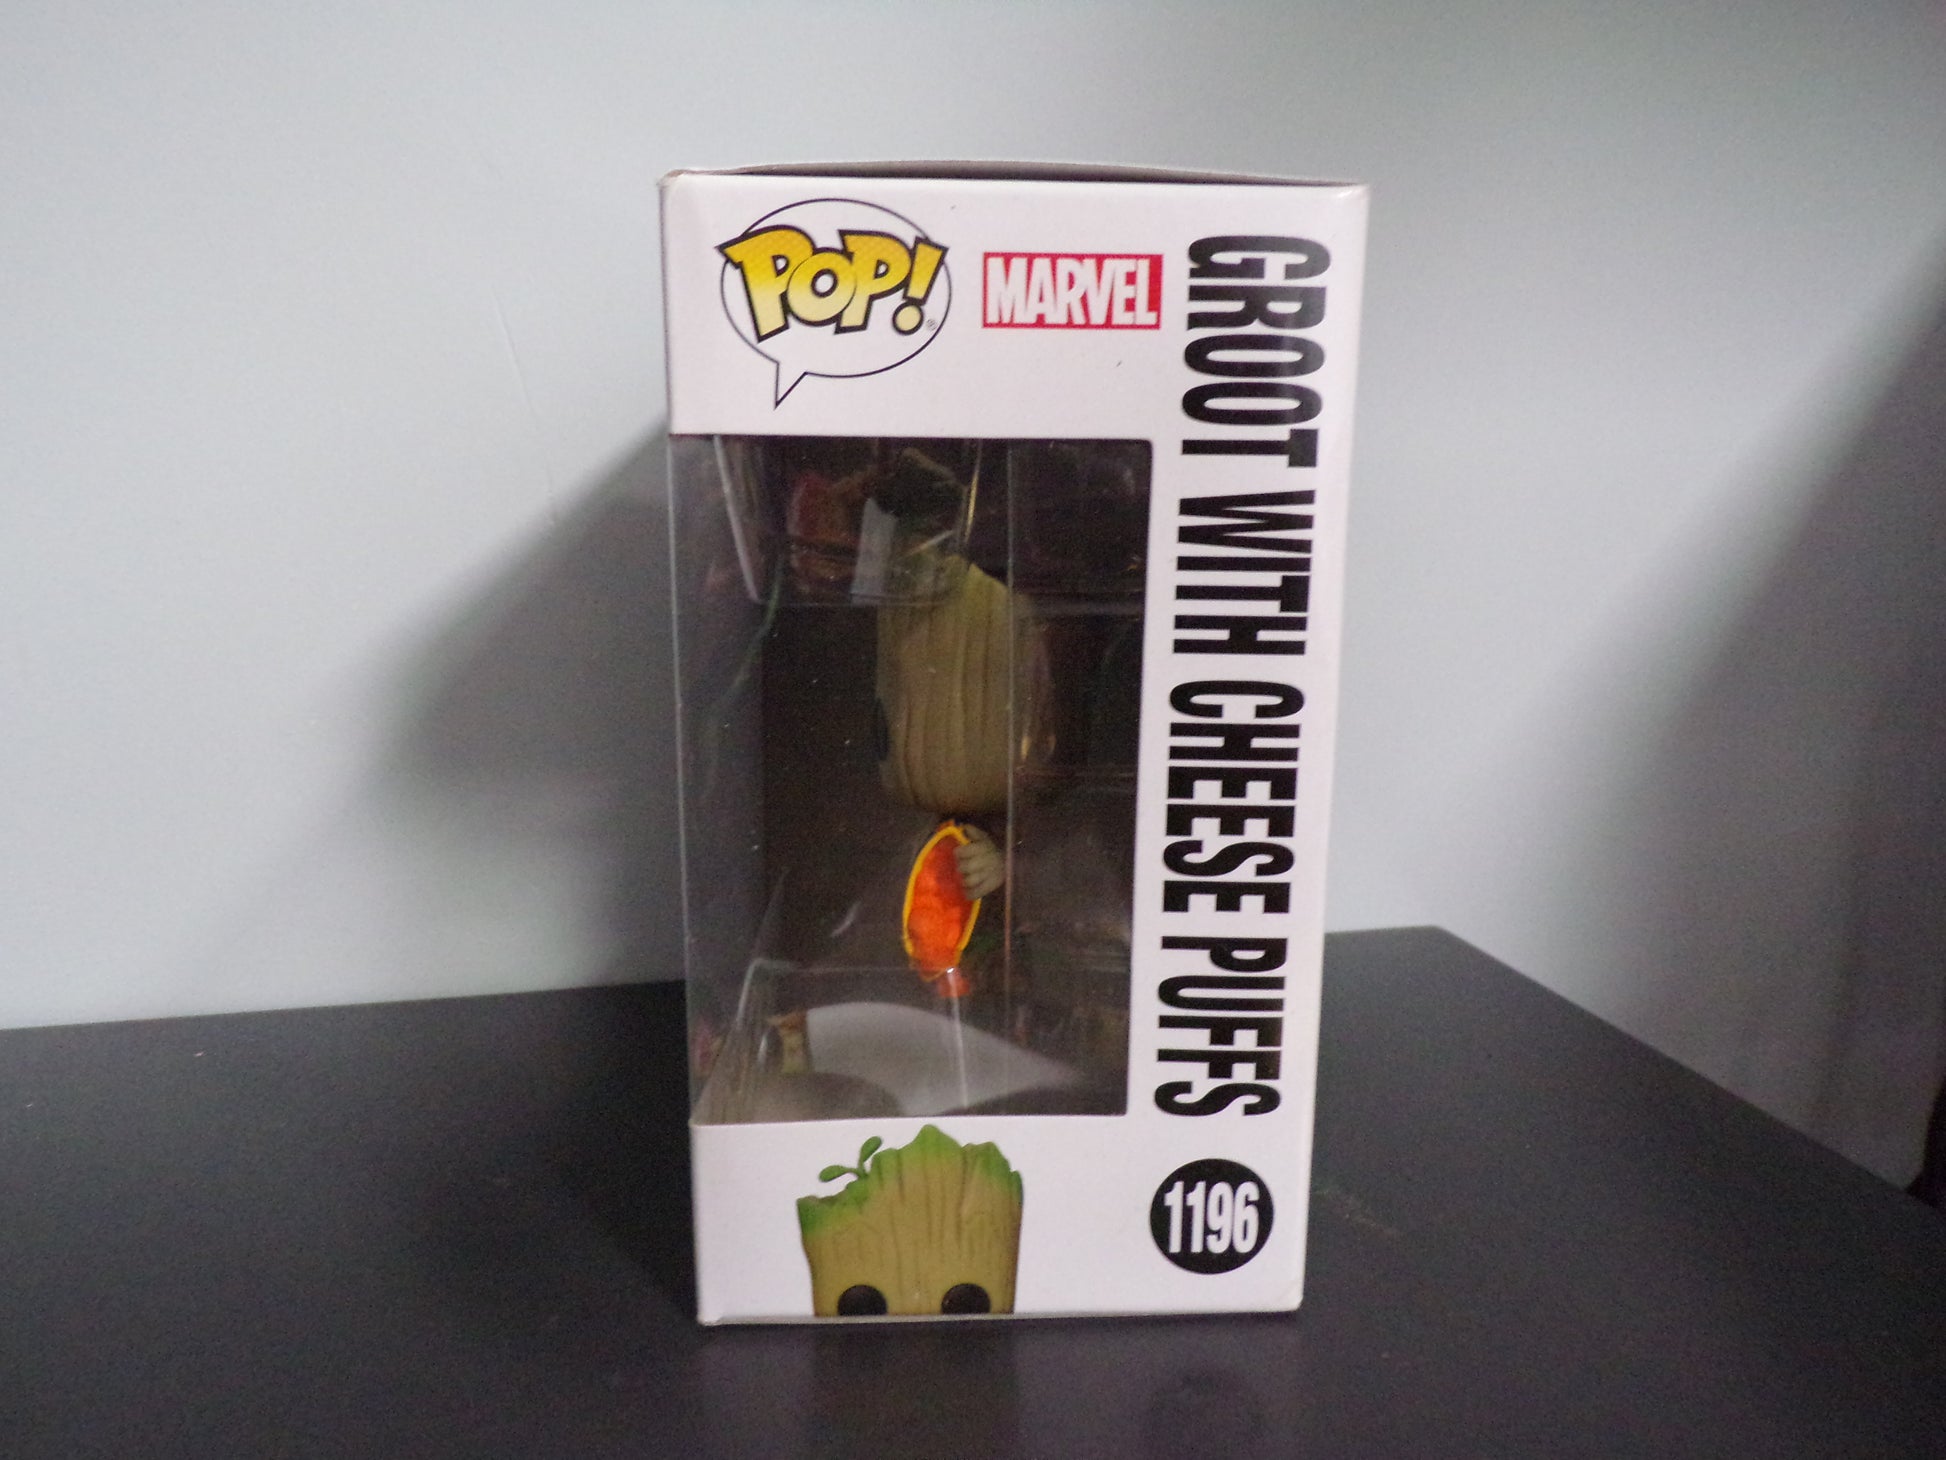 Marvel: Groot With Cheese Puffs (#1196) FUNKO Pop!